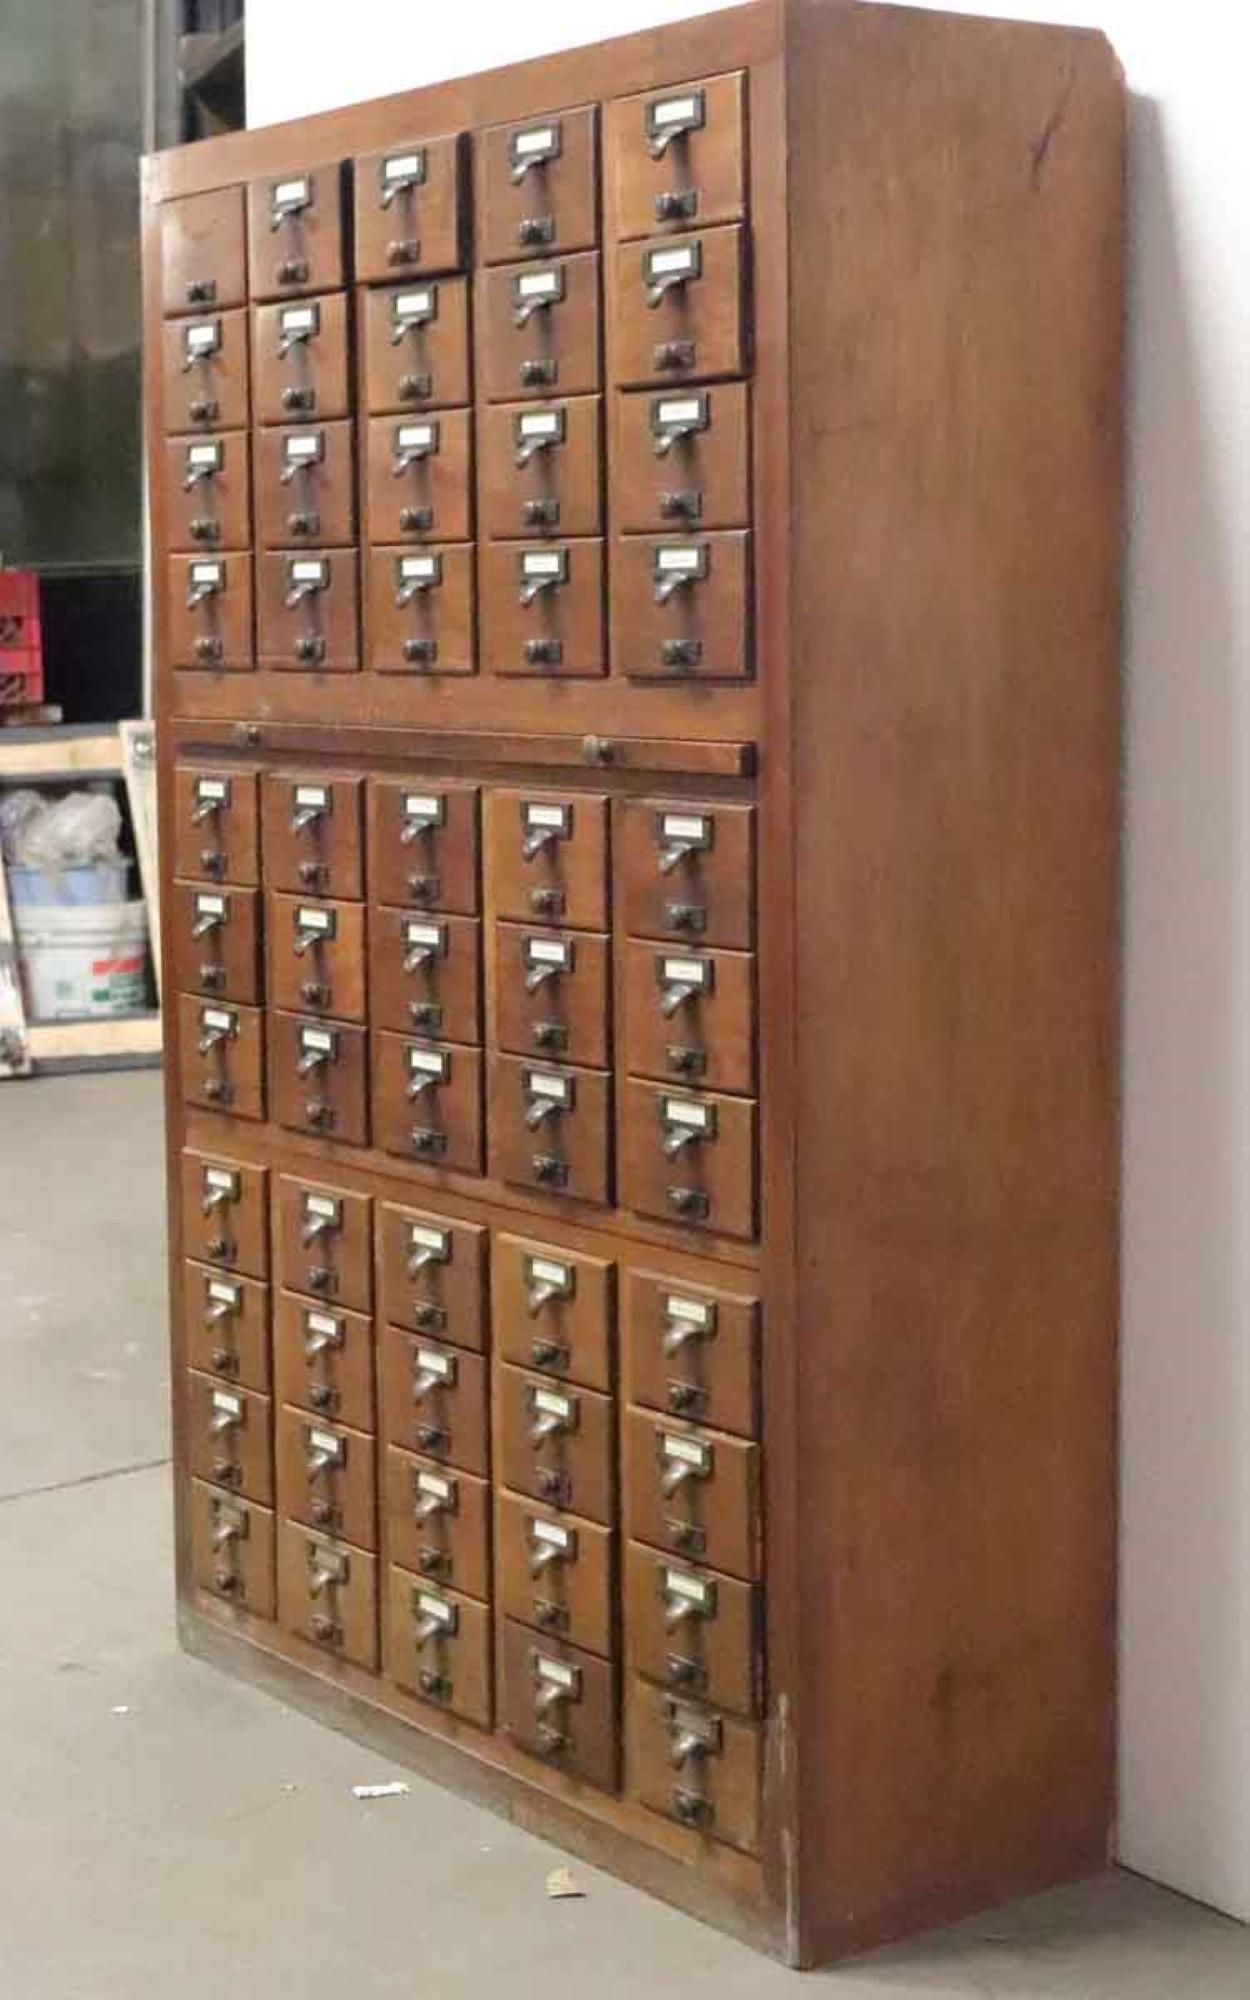 1960s library card catalog cabinet with 55 drawers and brass hardware. One pull missing. Some damage to back right corner. This can be seen at our 400 Gilligan St location in Scranton, PA.